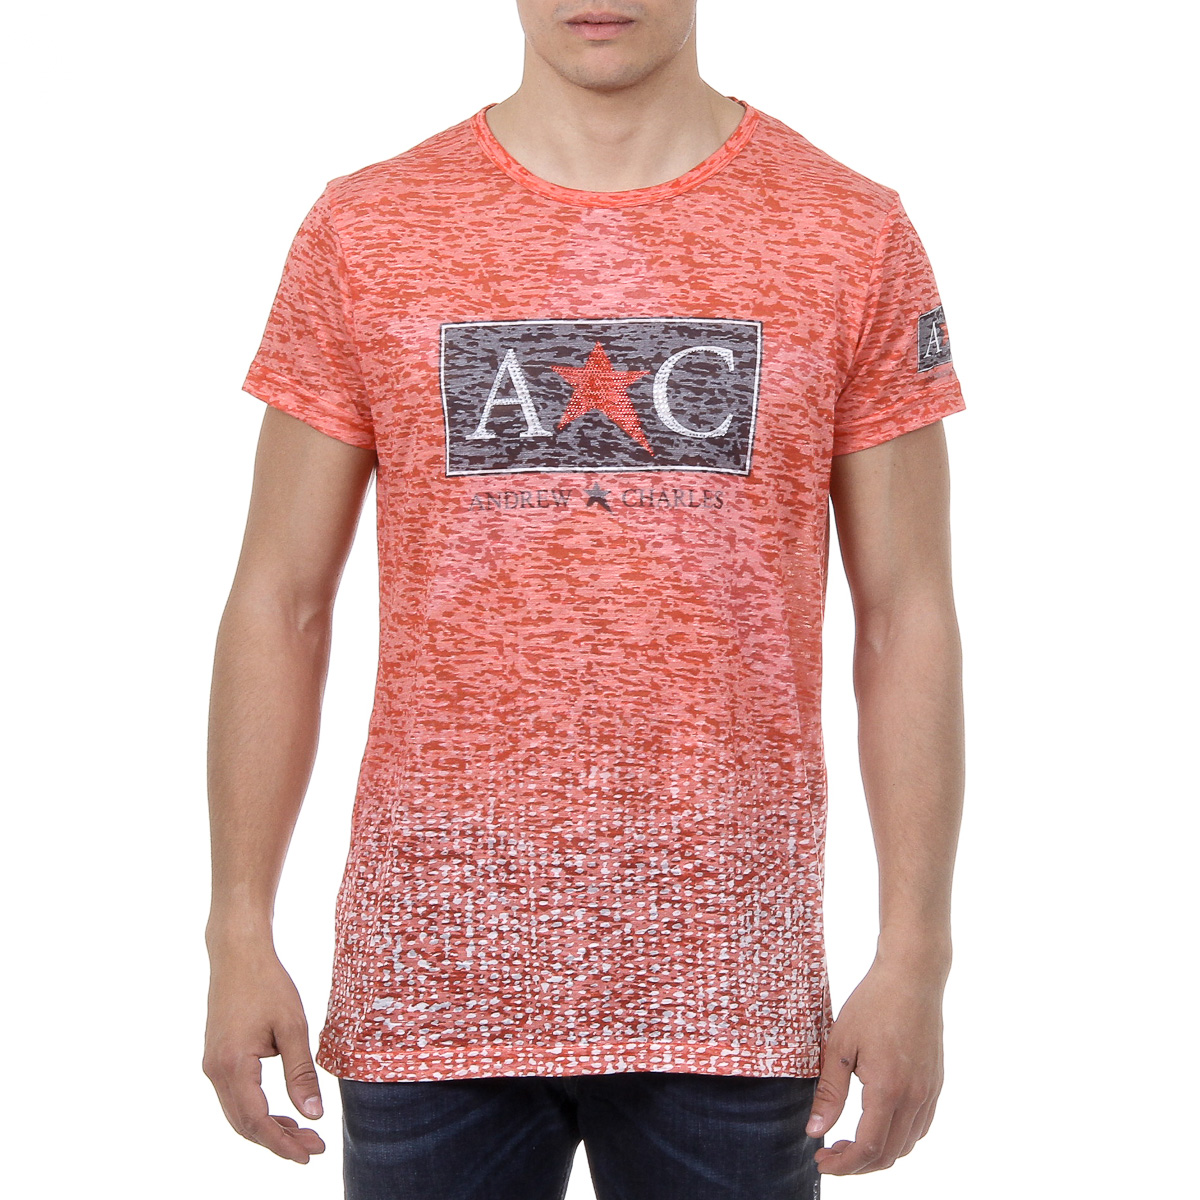 Andrew Charles Mens T-Shirt Short Sleeves Round Neck Red LEVI